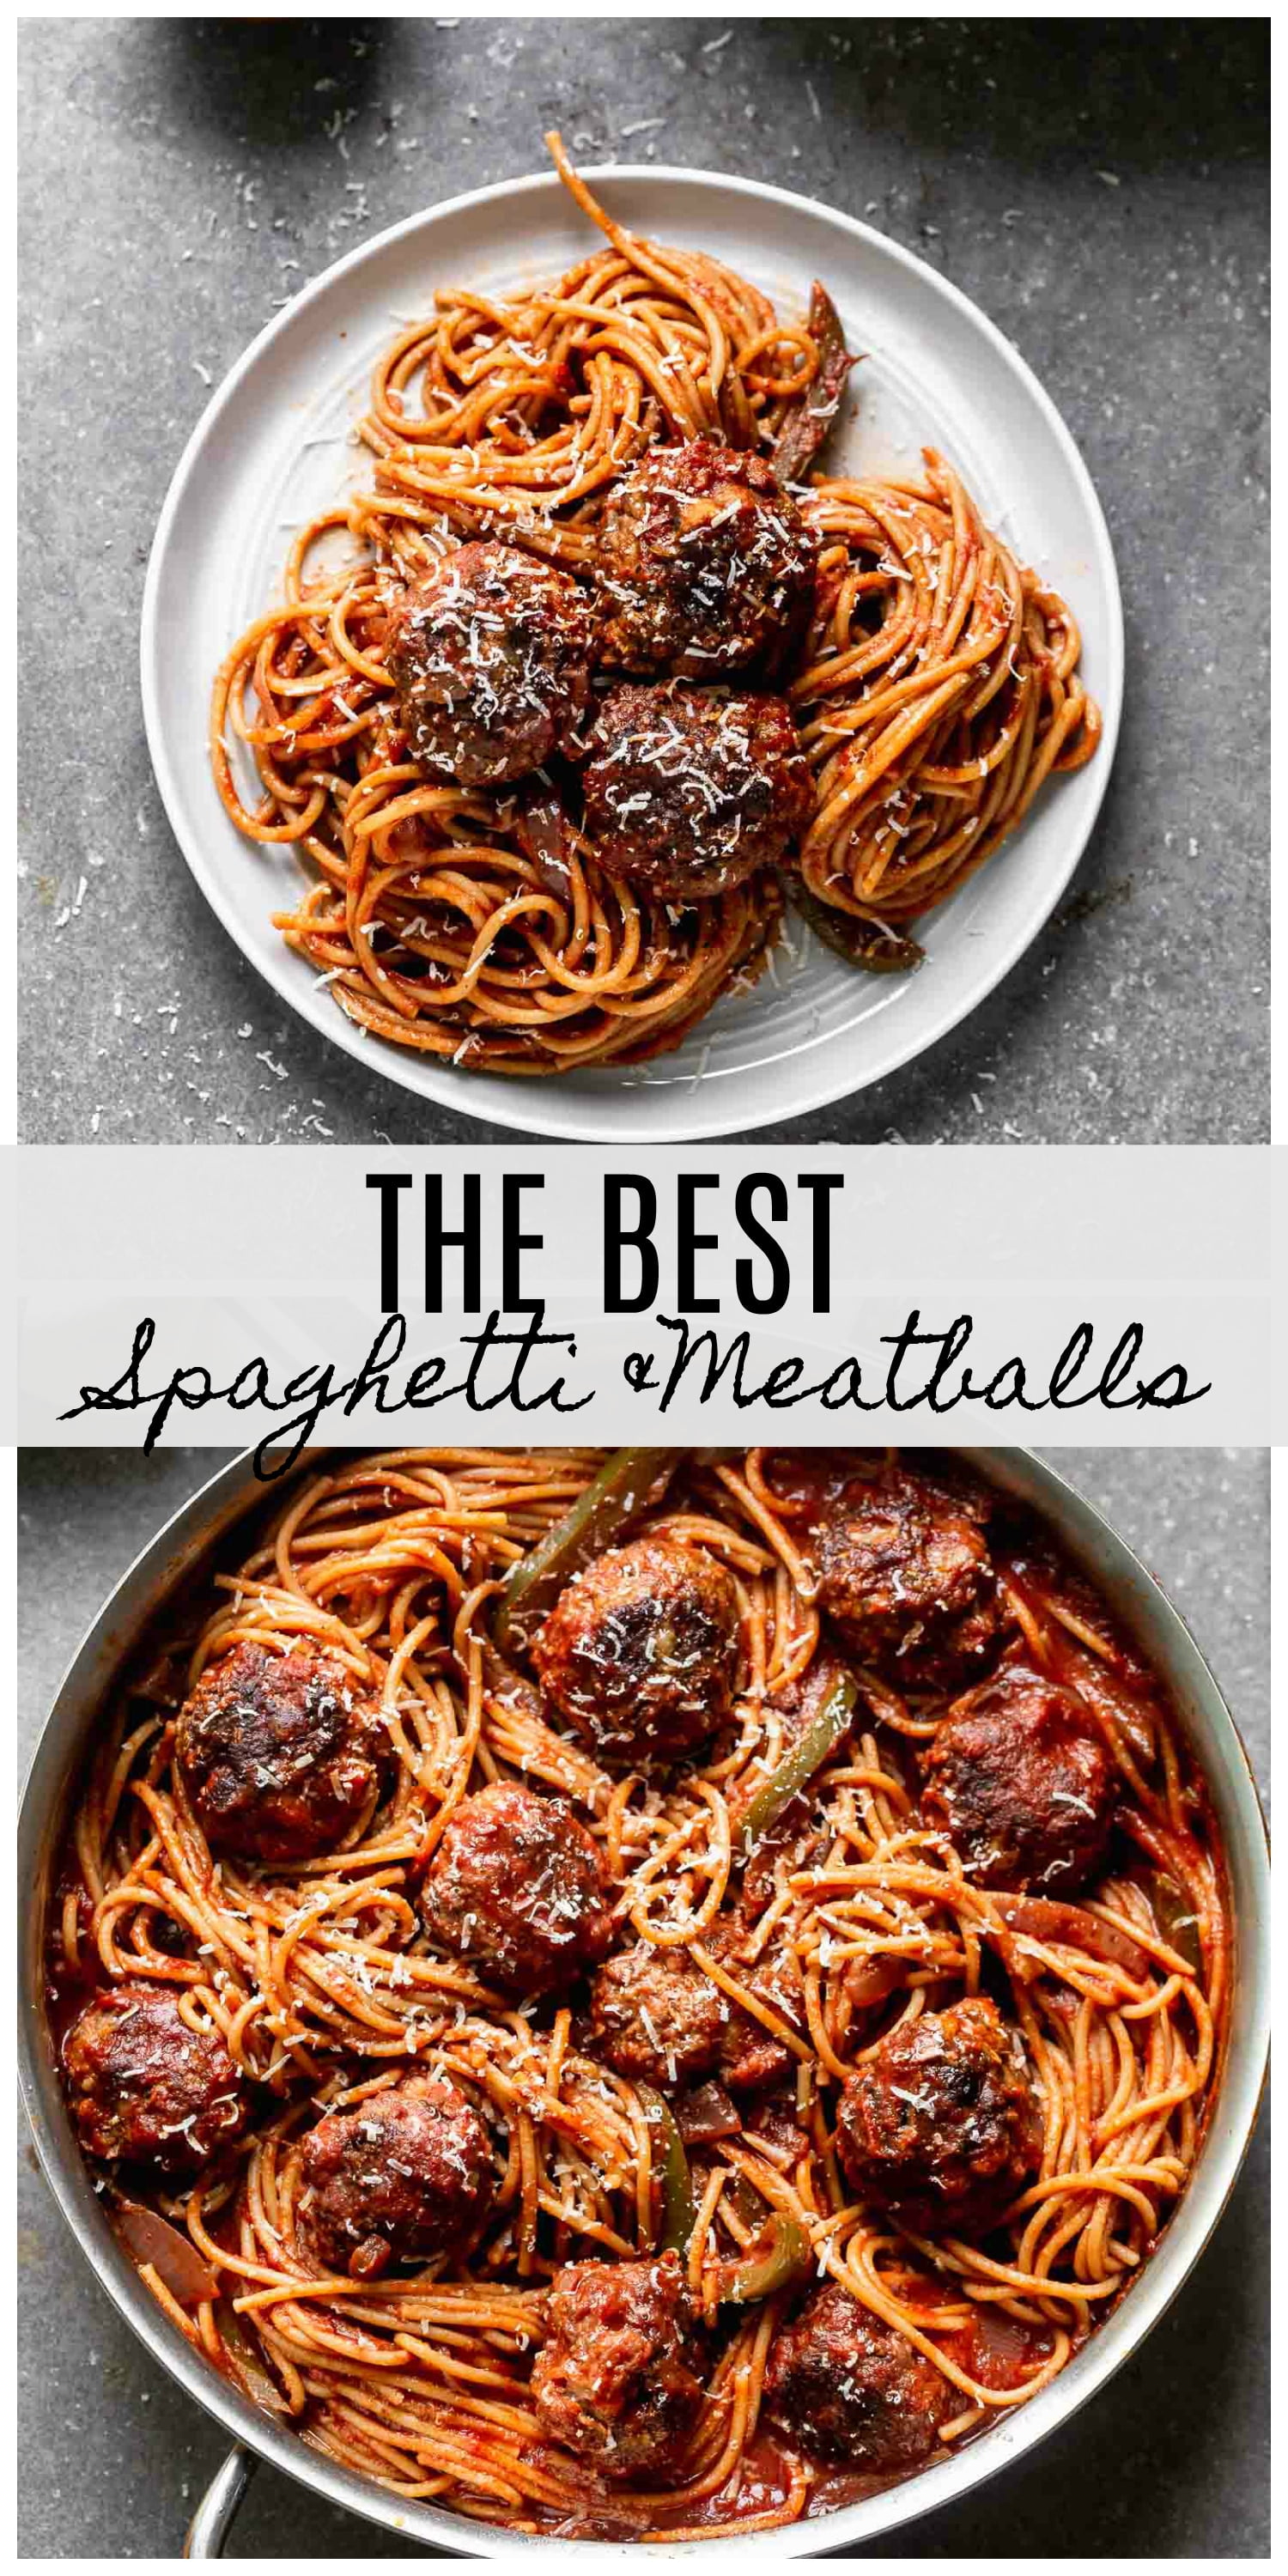 These are The BEST Spaghetti and Meatballs you'll ever have! The meatballs are SO tender thanks to a secret ingredient, and the sauce is something you'll want to slather on EVERYTHING.